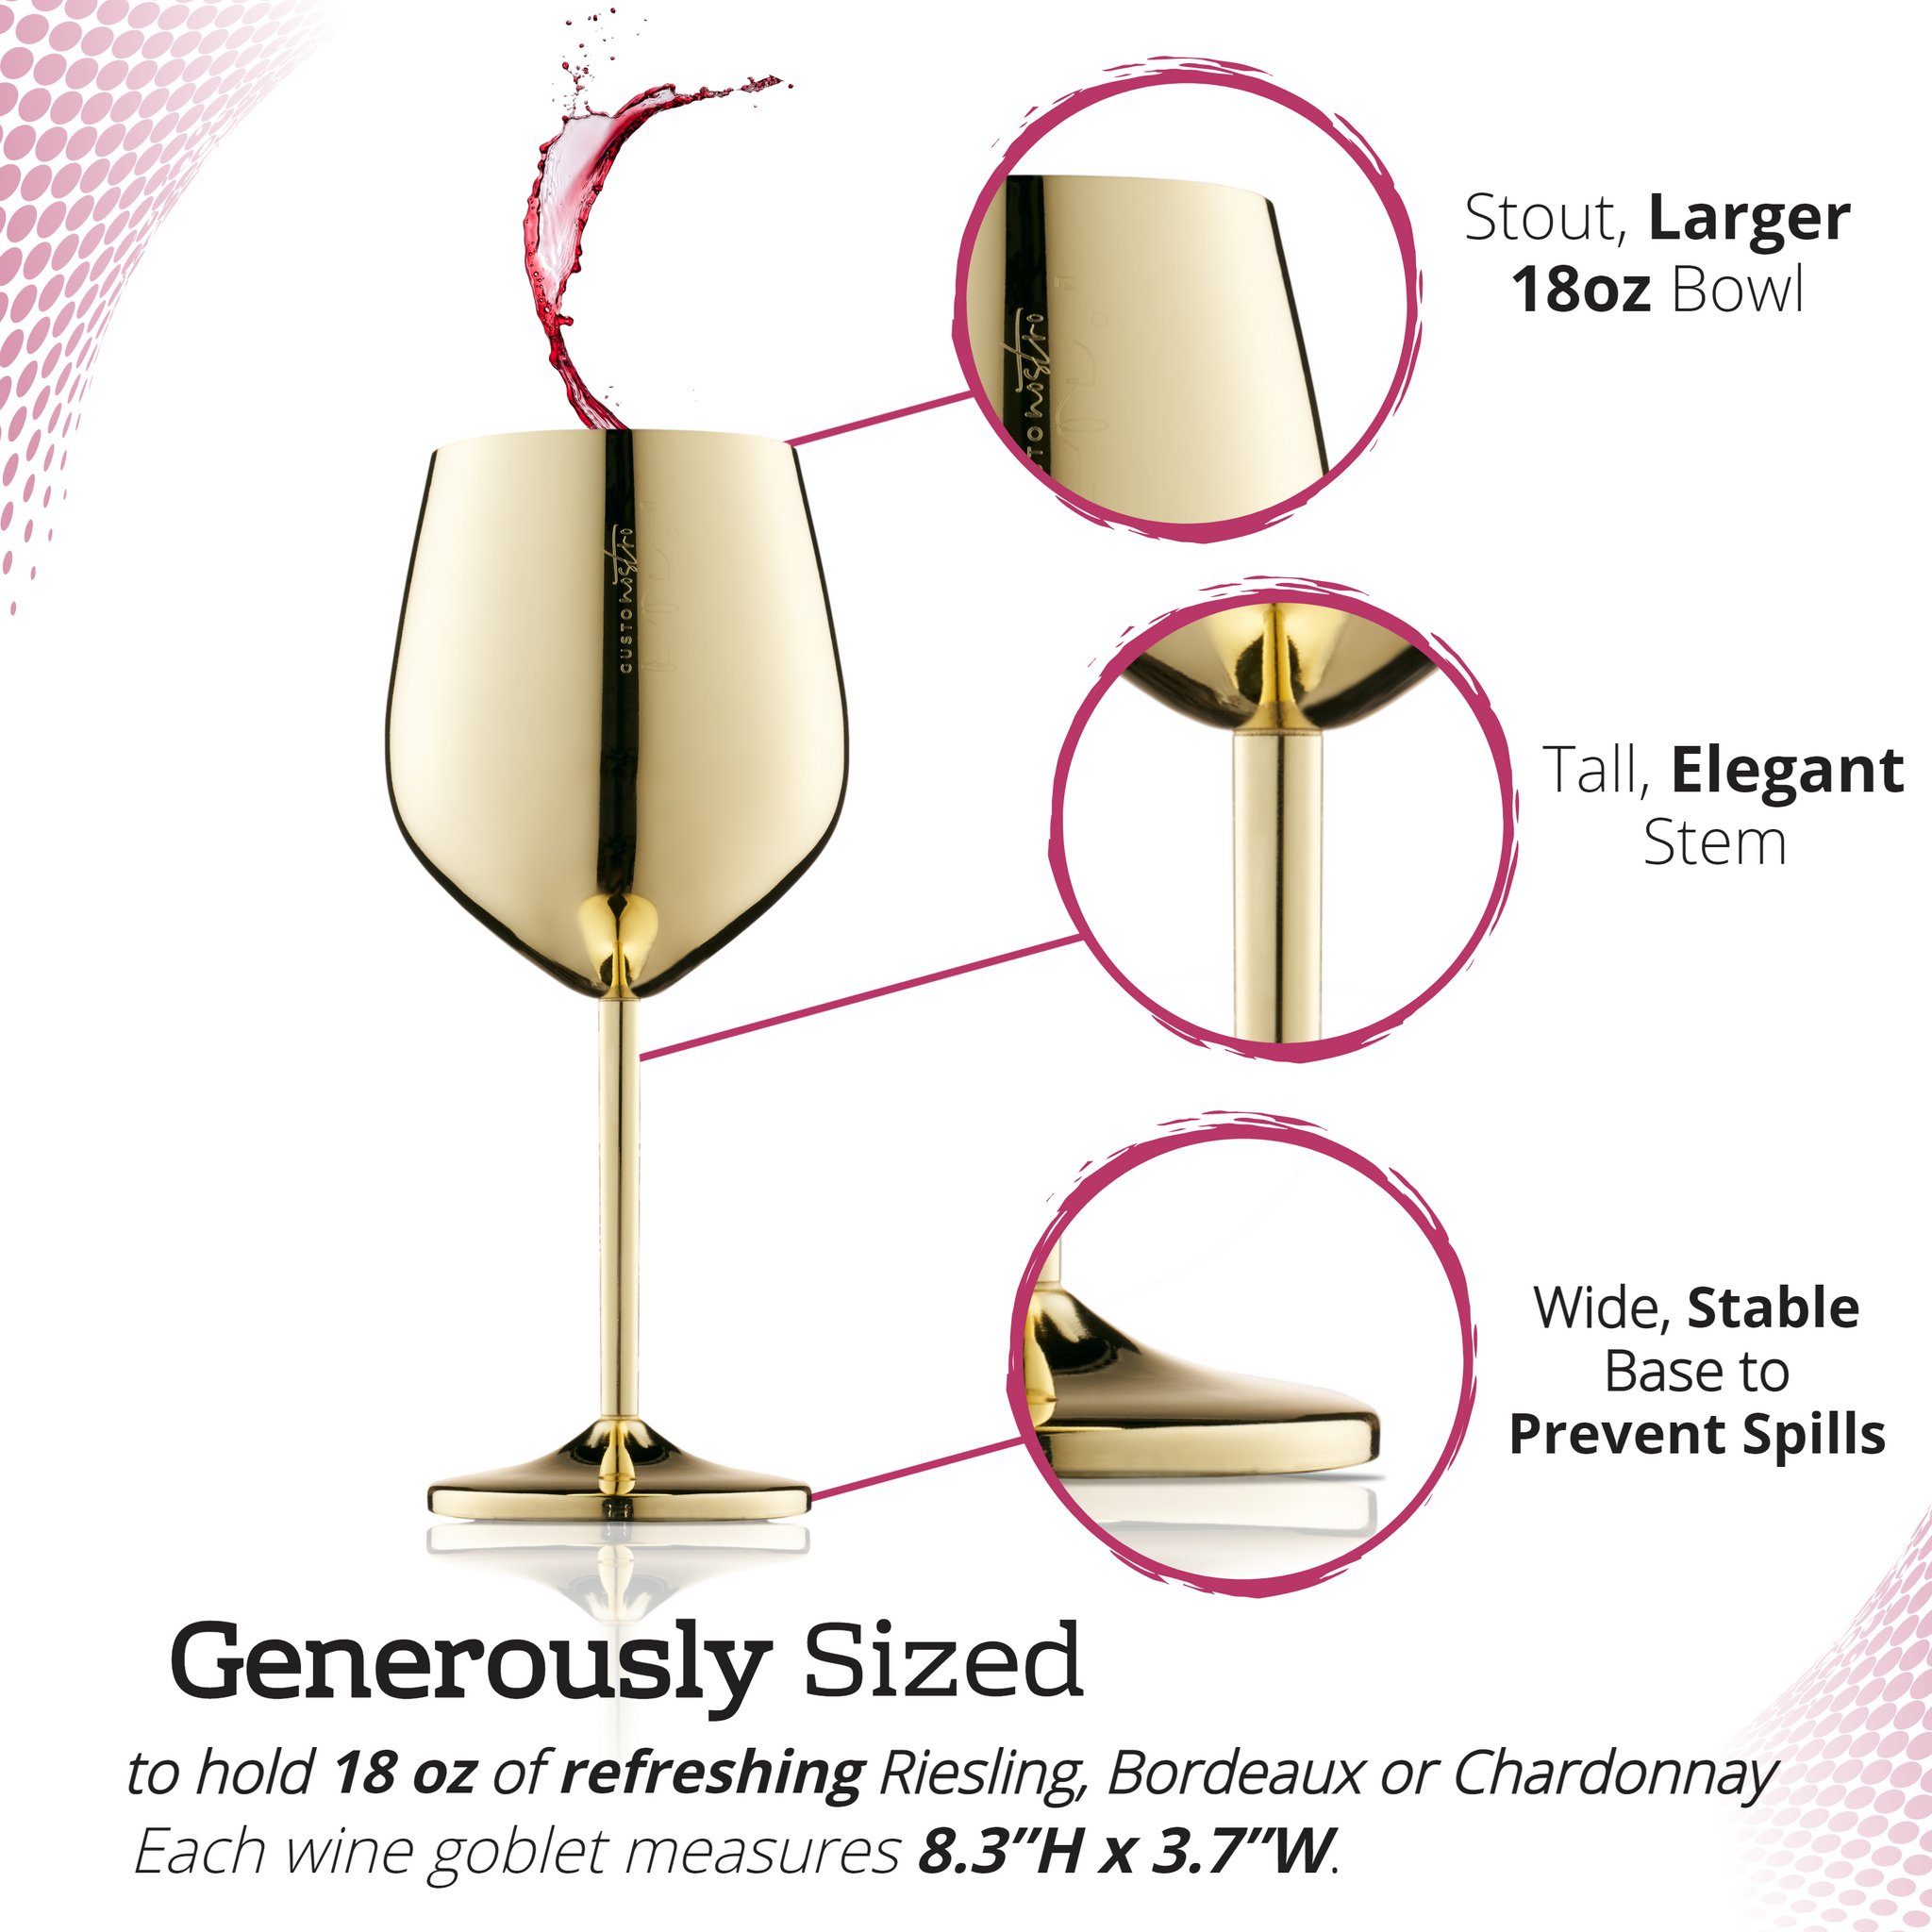 Gusto Nostro Stainless Steel Wine Glass - 18 oz - Cute, Unbreakable Wi